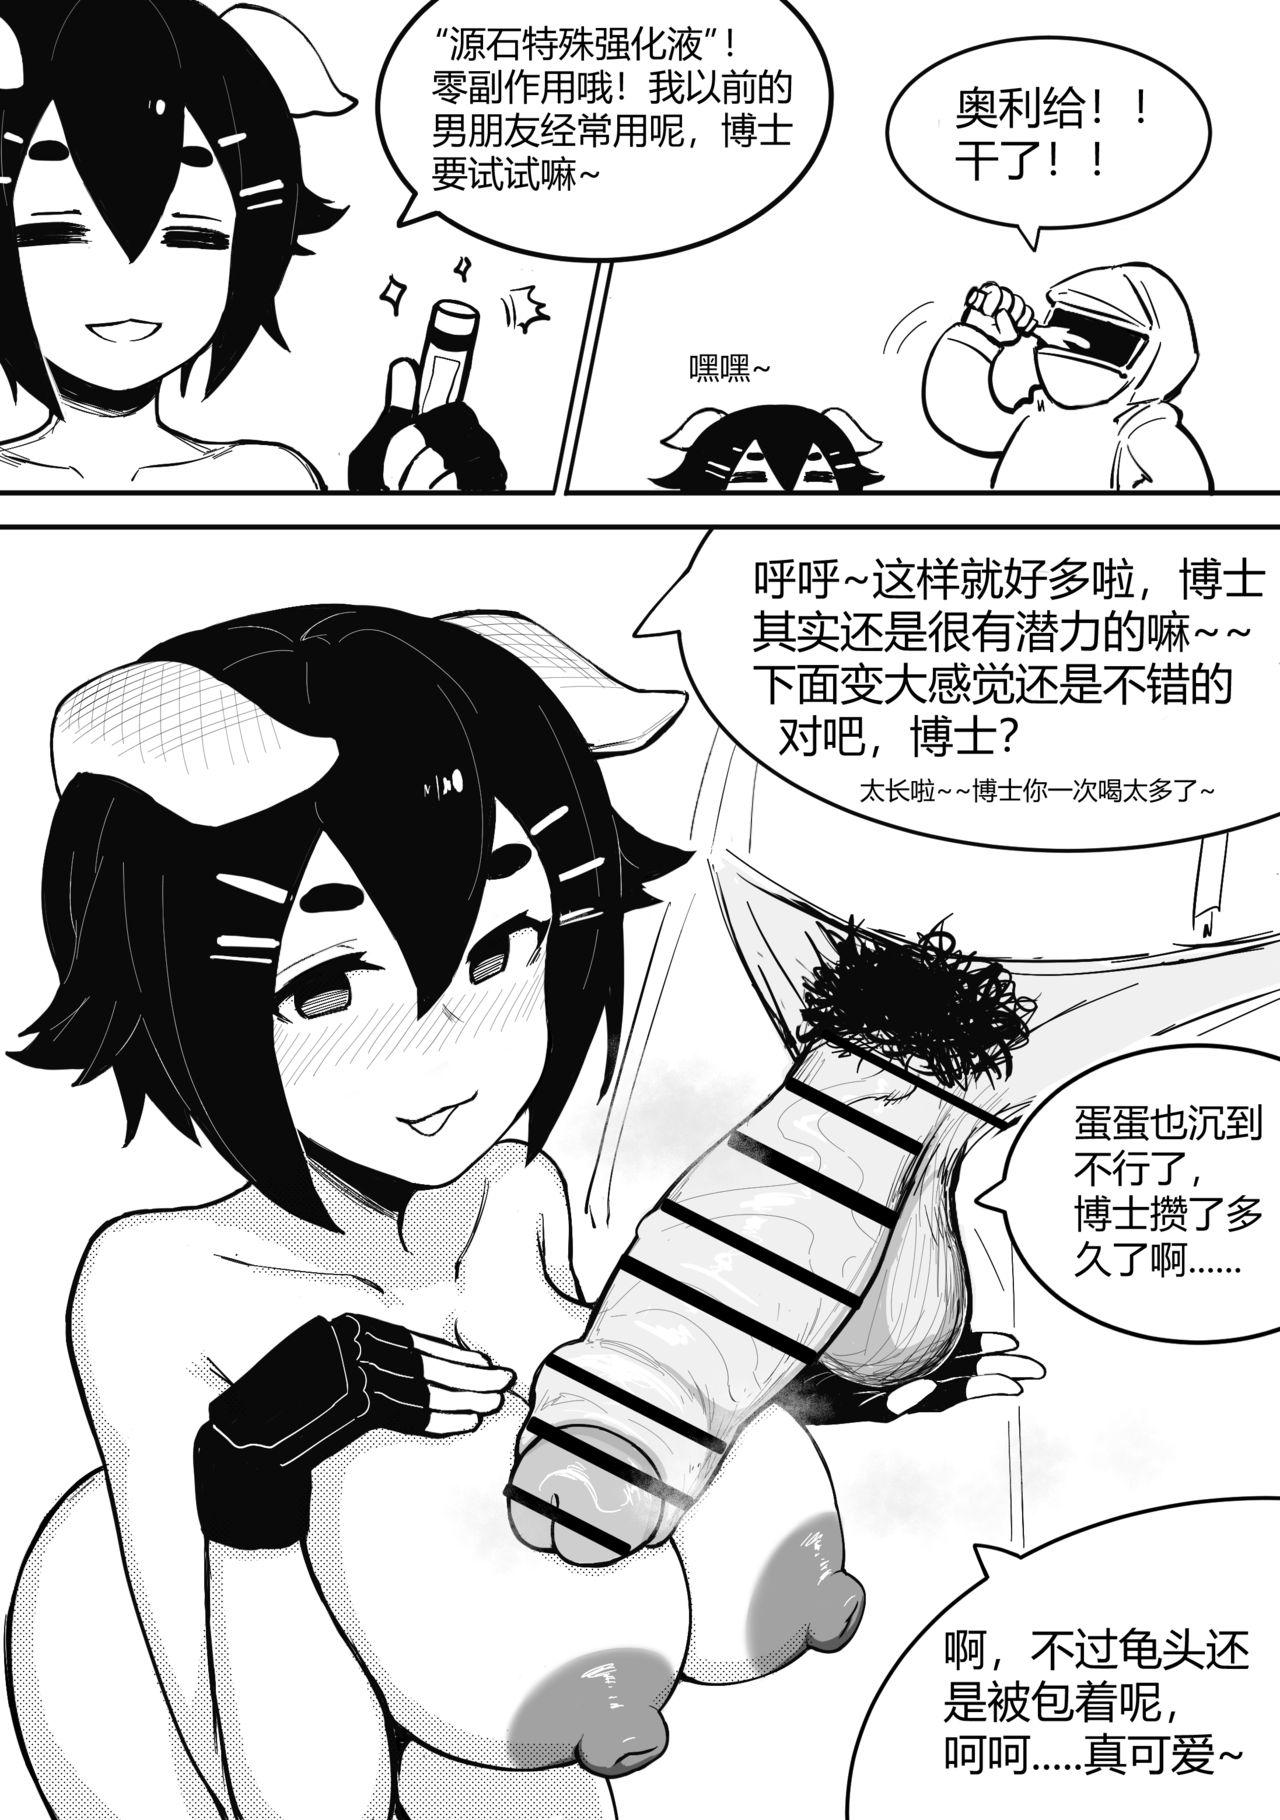 Joven 可爱的杰克【9P】（Arknights） - Arknights Yanks Featured - Page 4